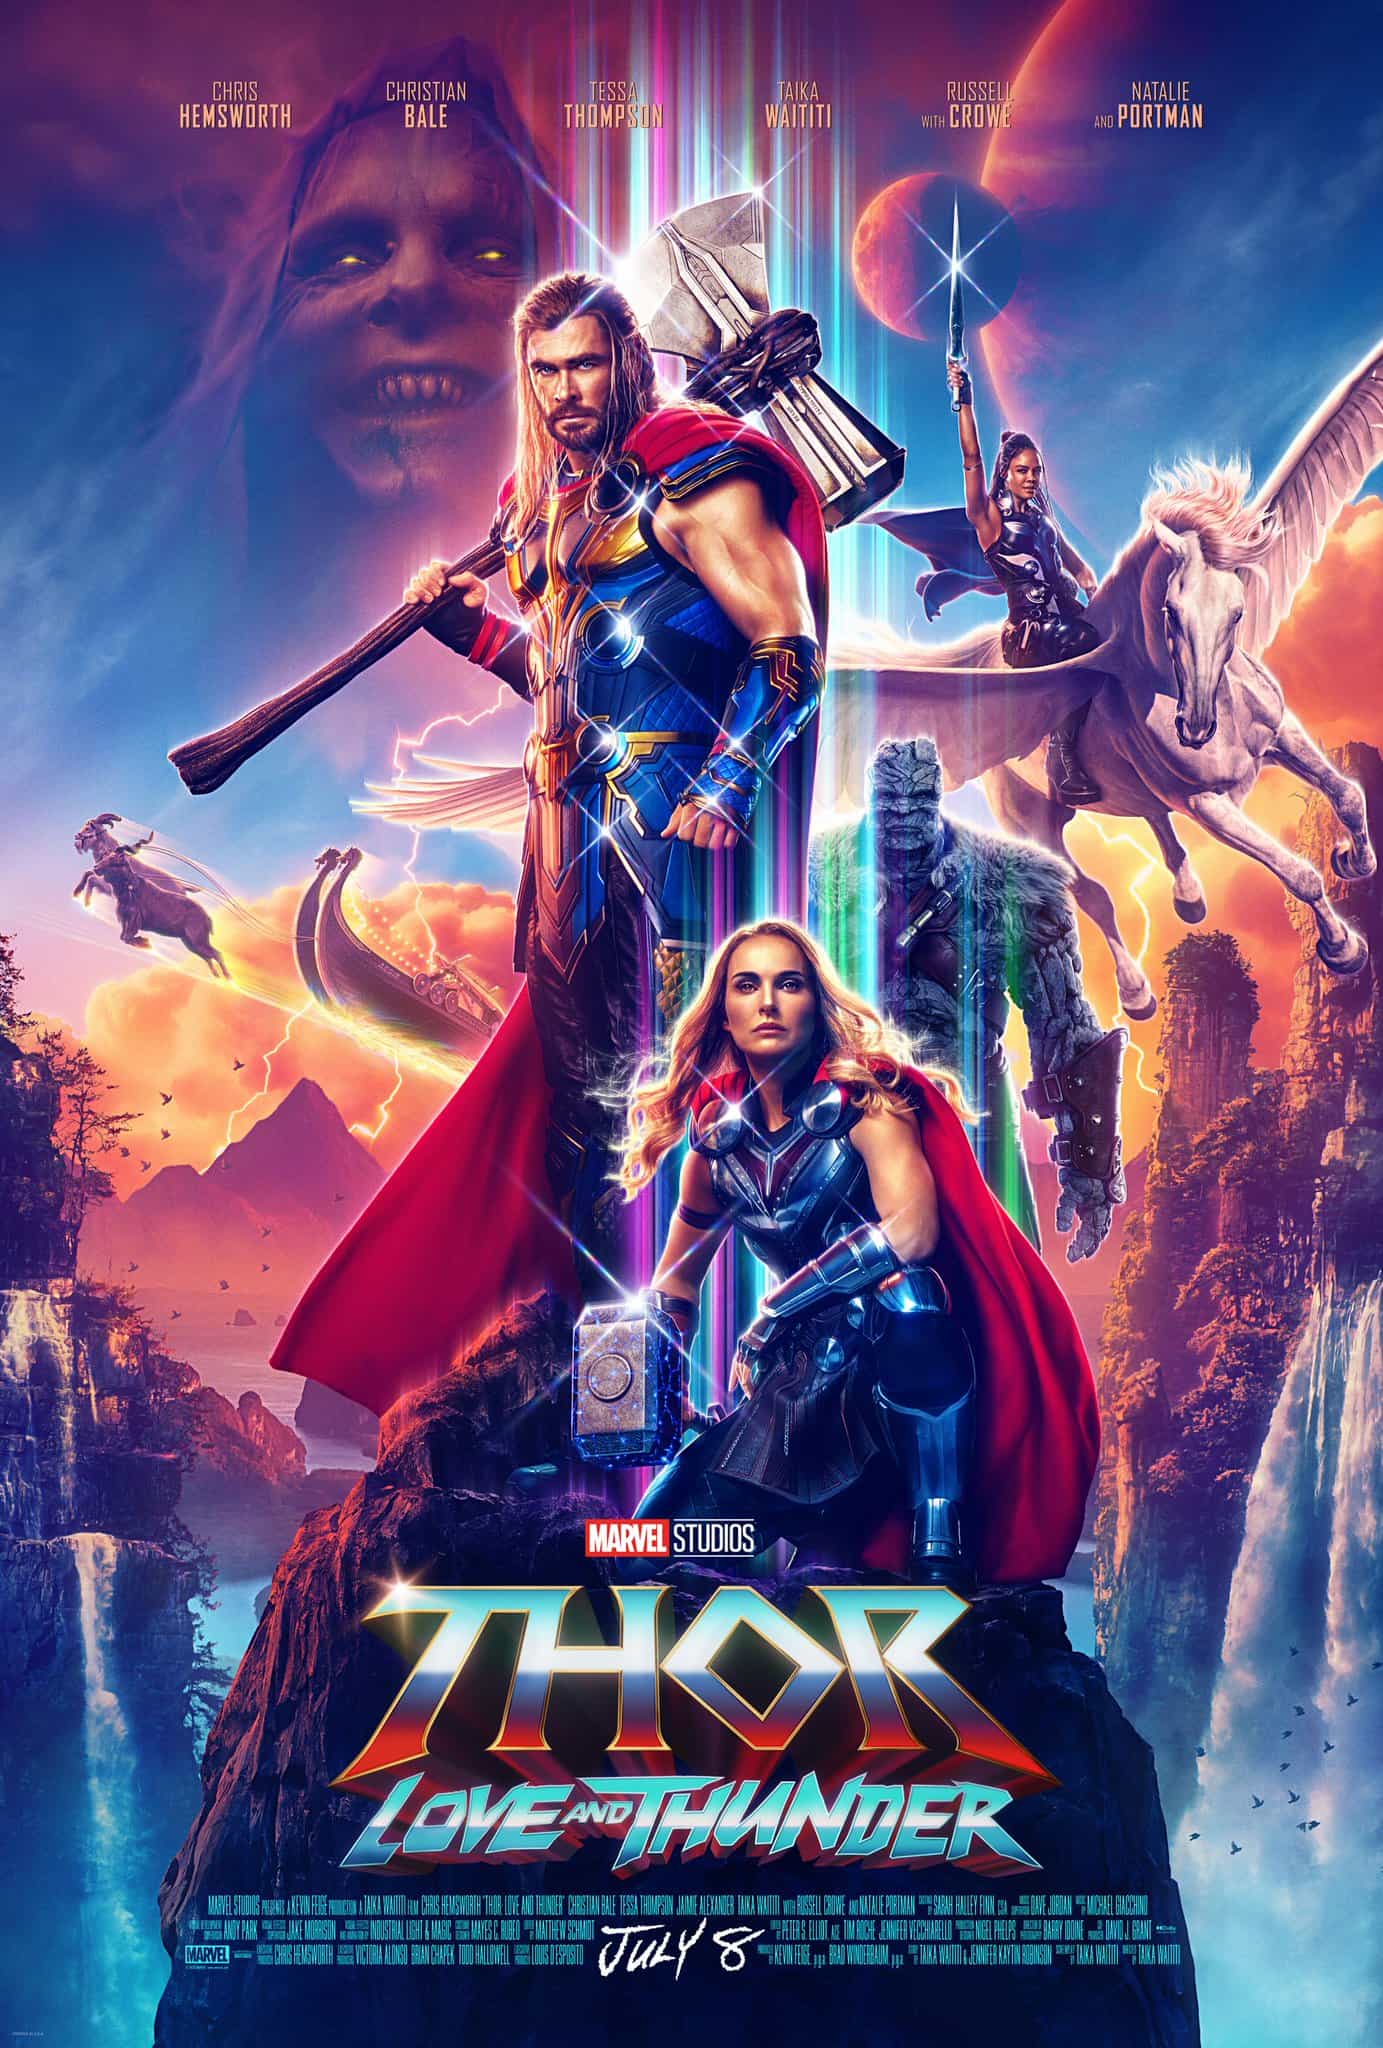 Thor: Love and Thunder has been given a 12A age rating in the UK for moderate fantasy violence, injury detail, threat, horror, sex references